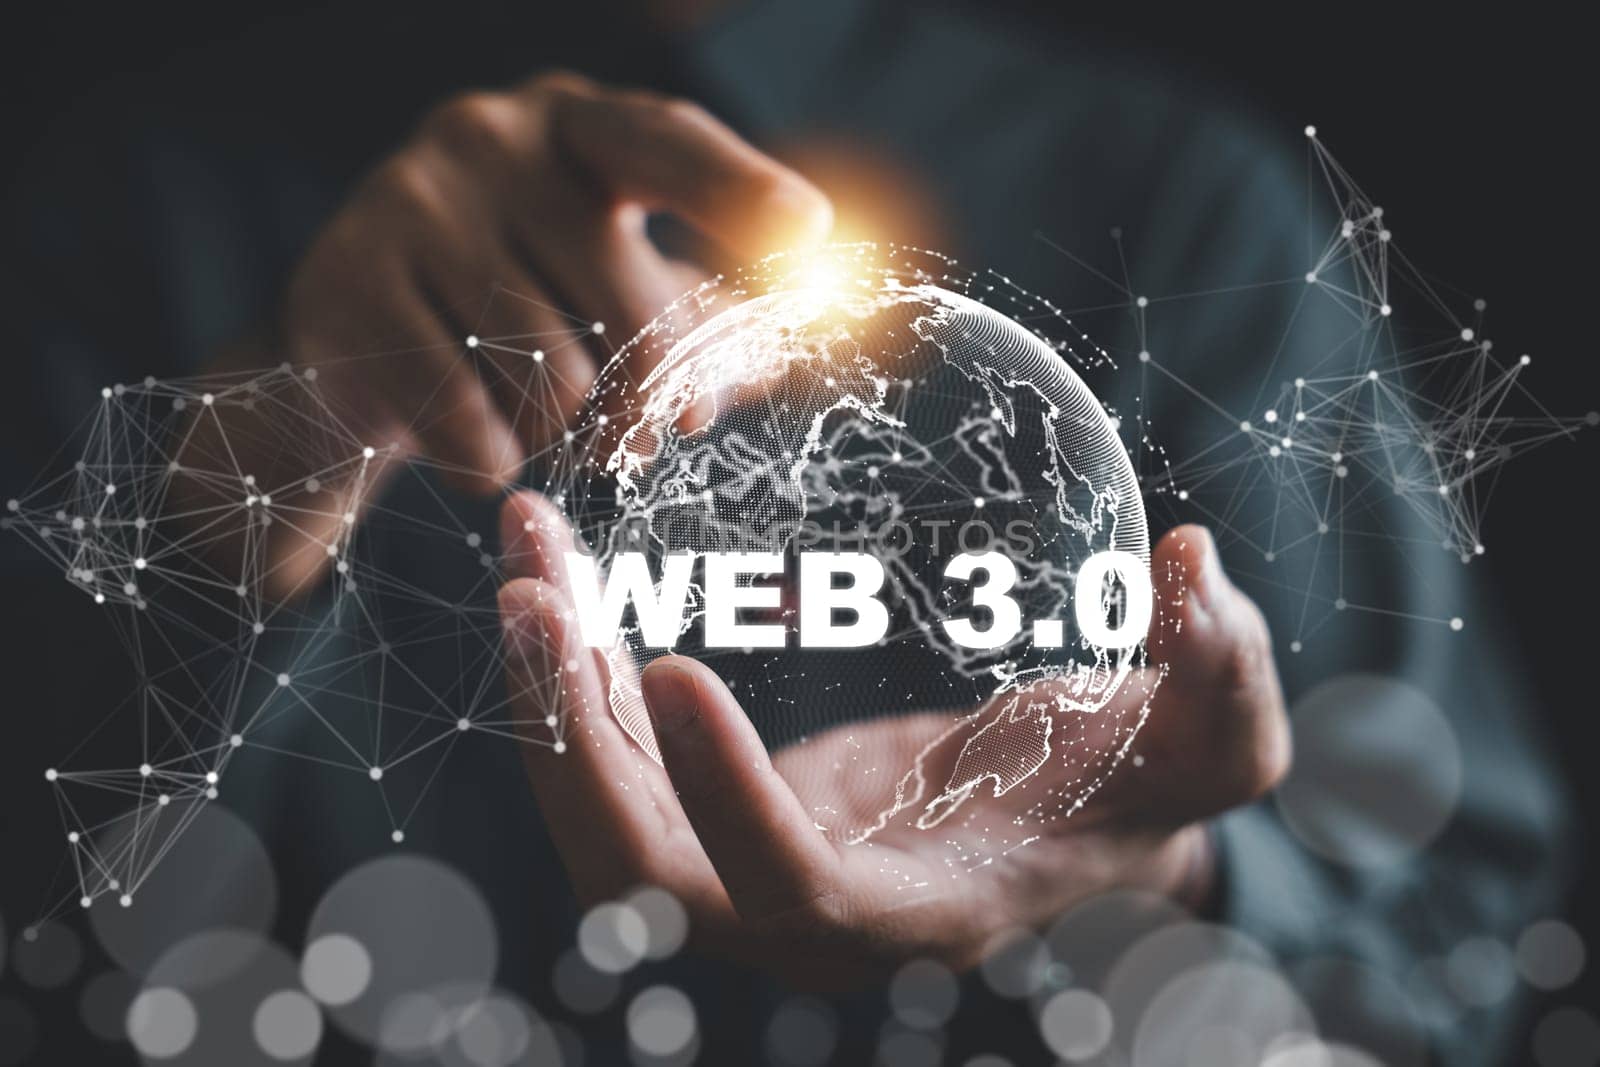 Web and technology concepts, forward thinking businessman in suit stands against a captivating dark background, Exciting possibilities of Web 3.0 in internet development and global connectivity. Web3